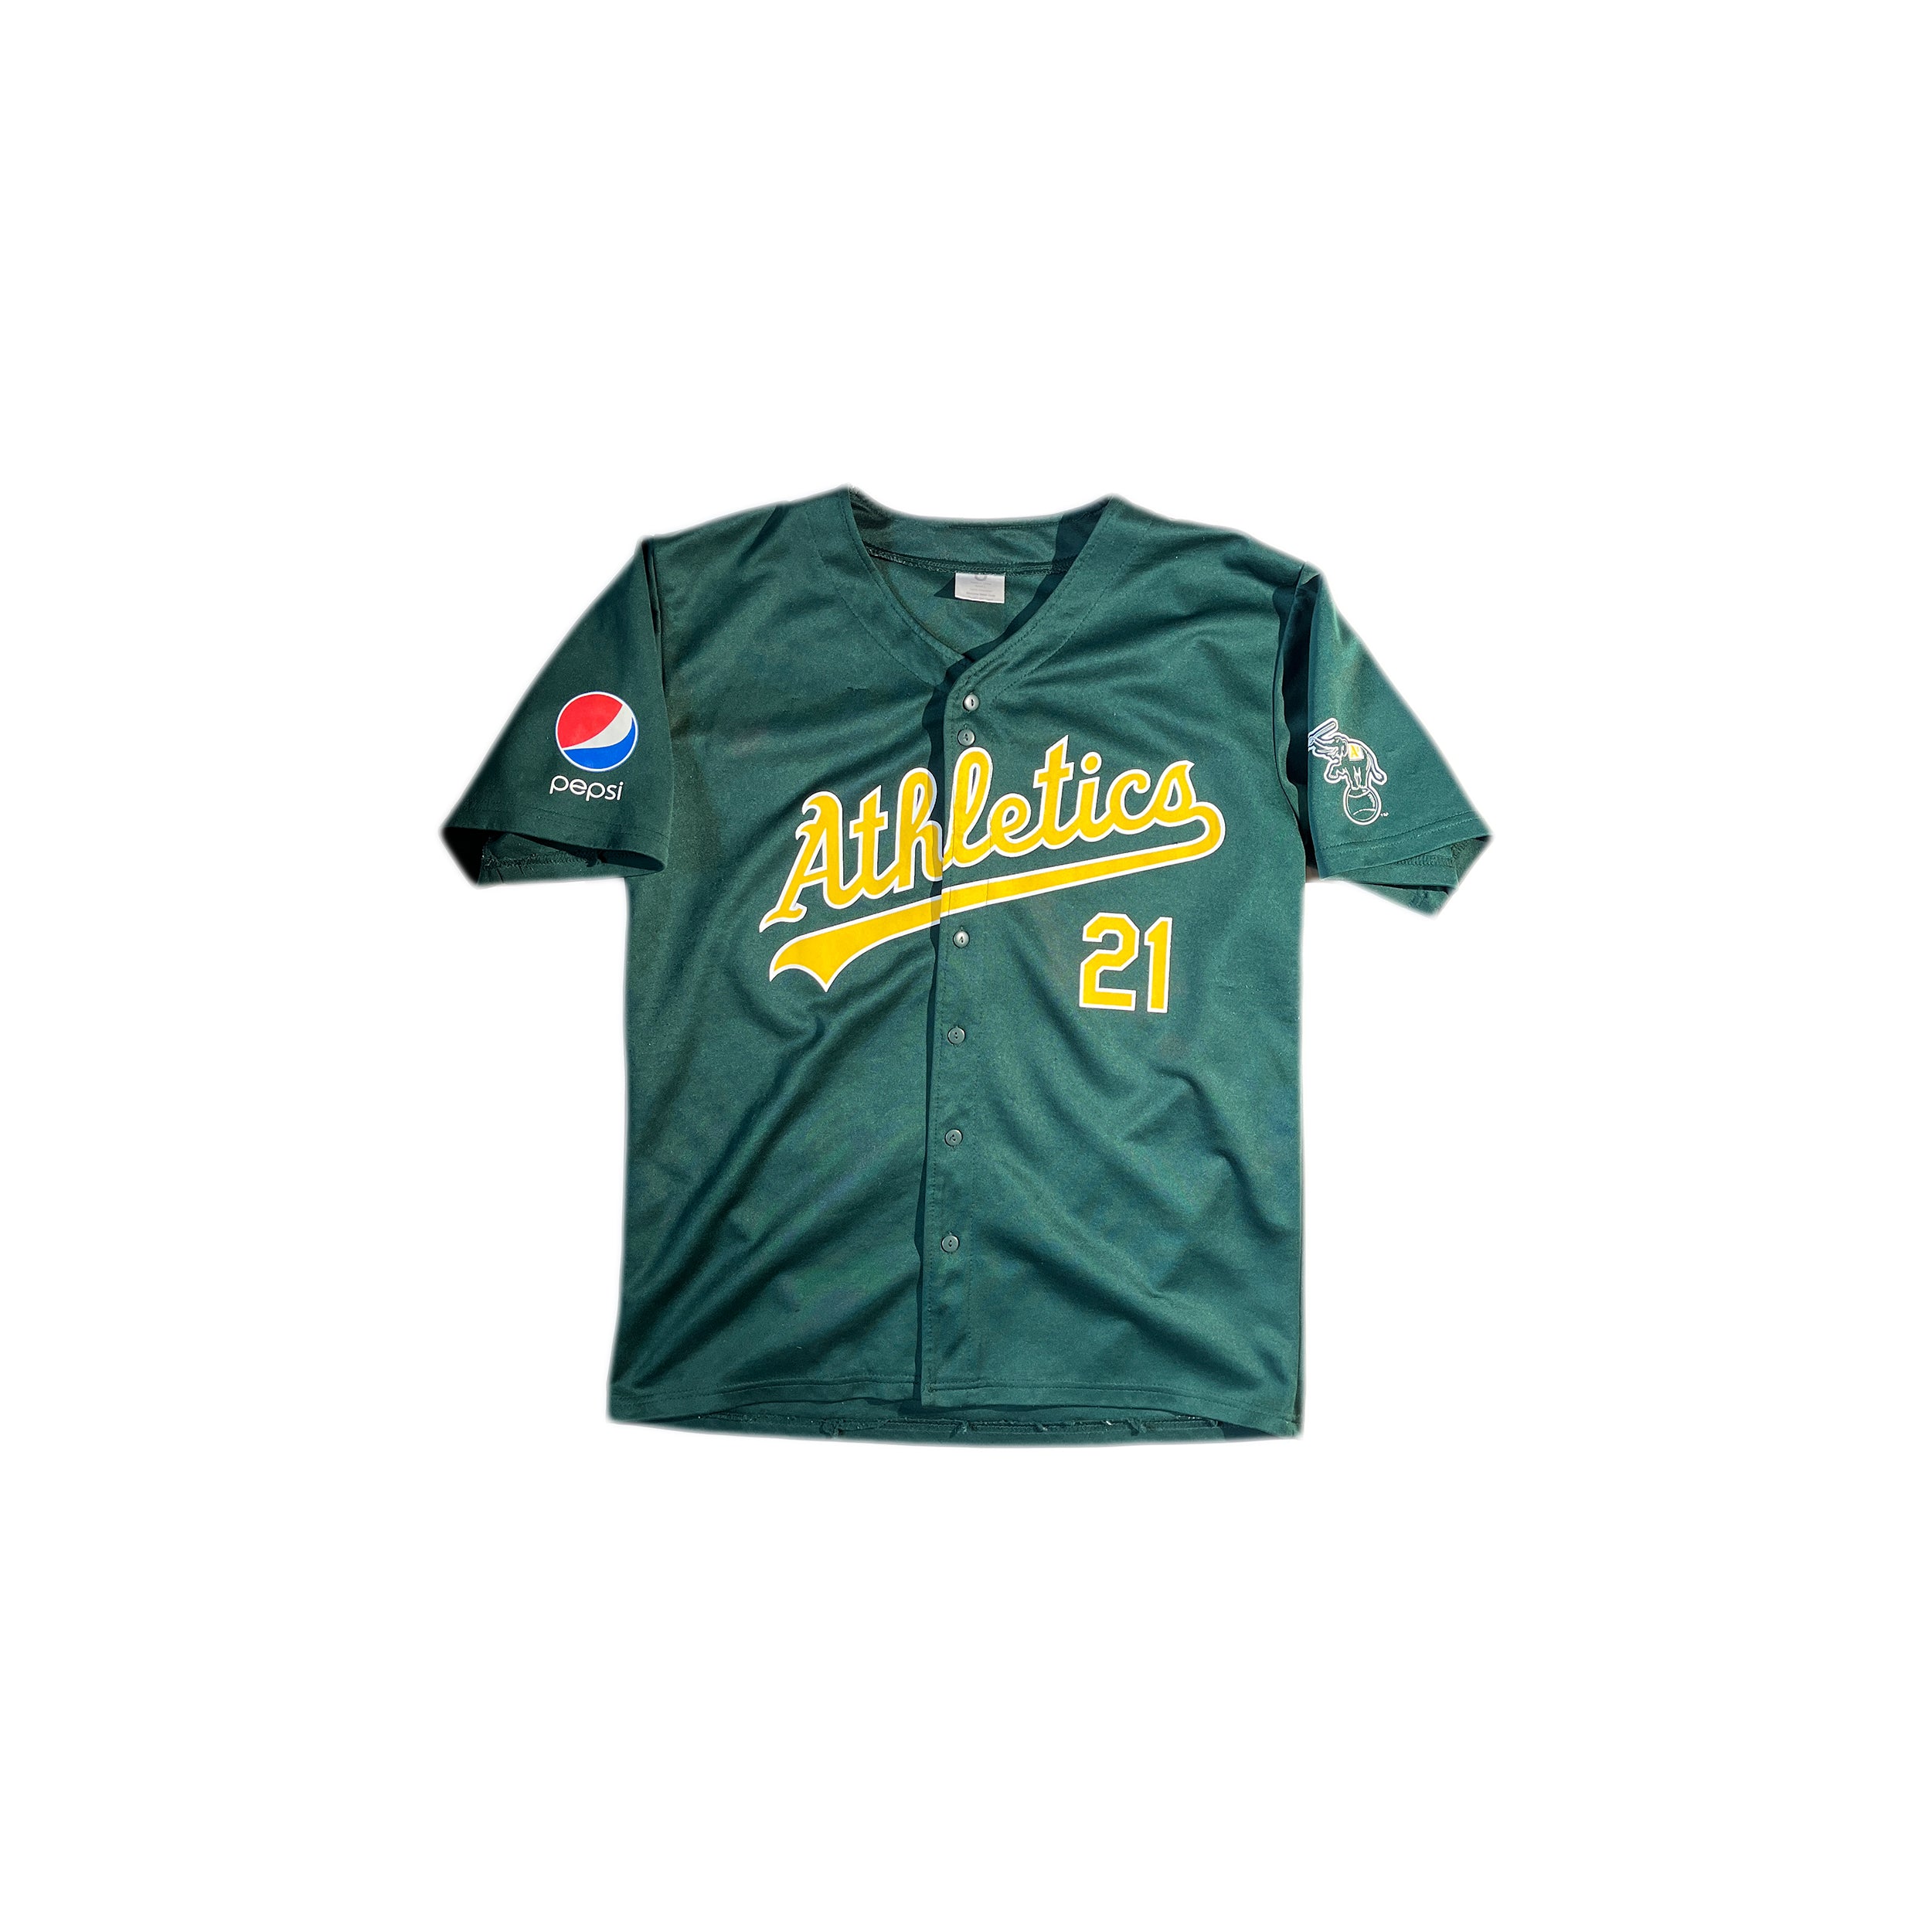 Oakland Athletics Jersey Free Shipping - The Vintage Twin